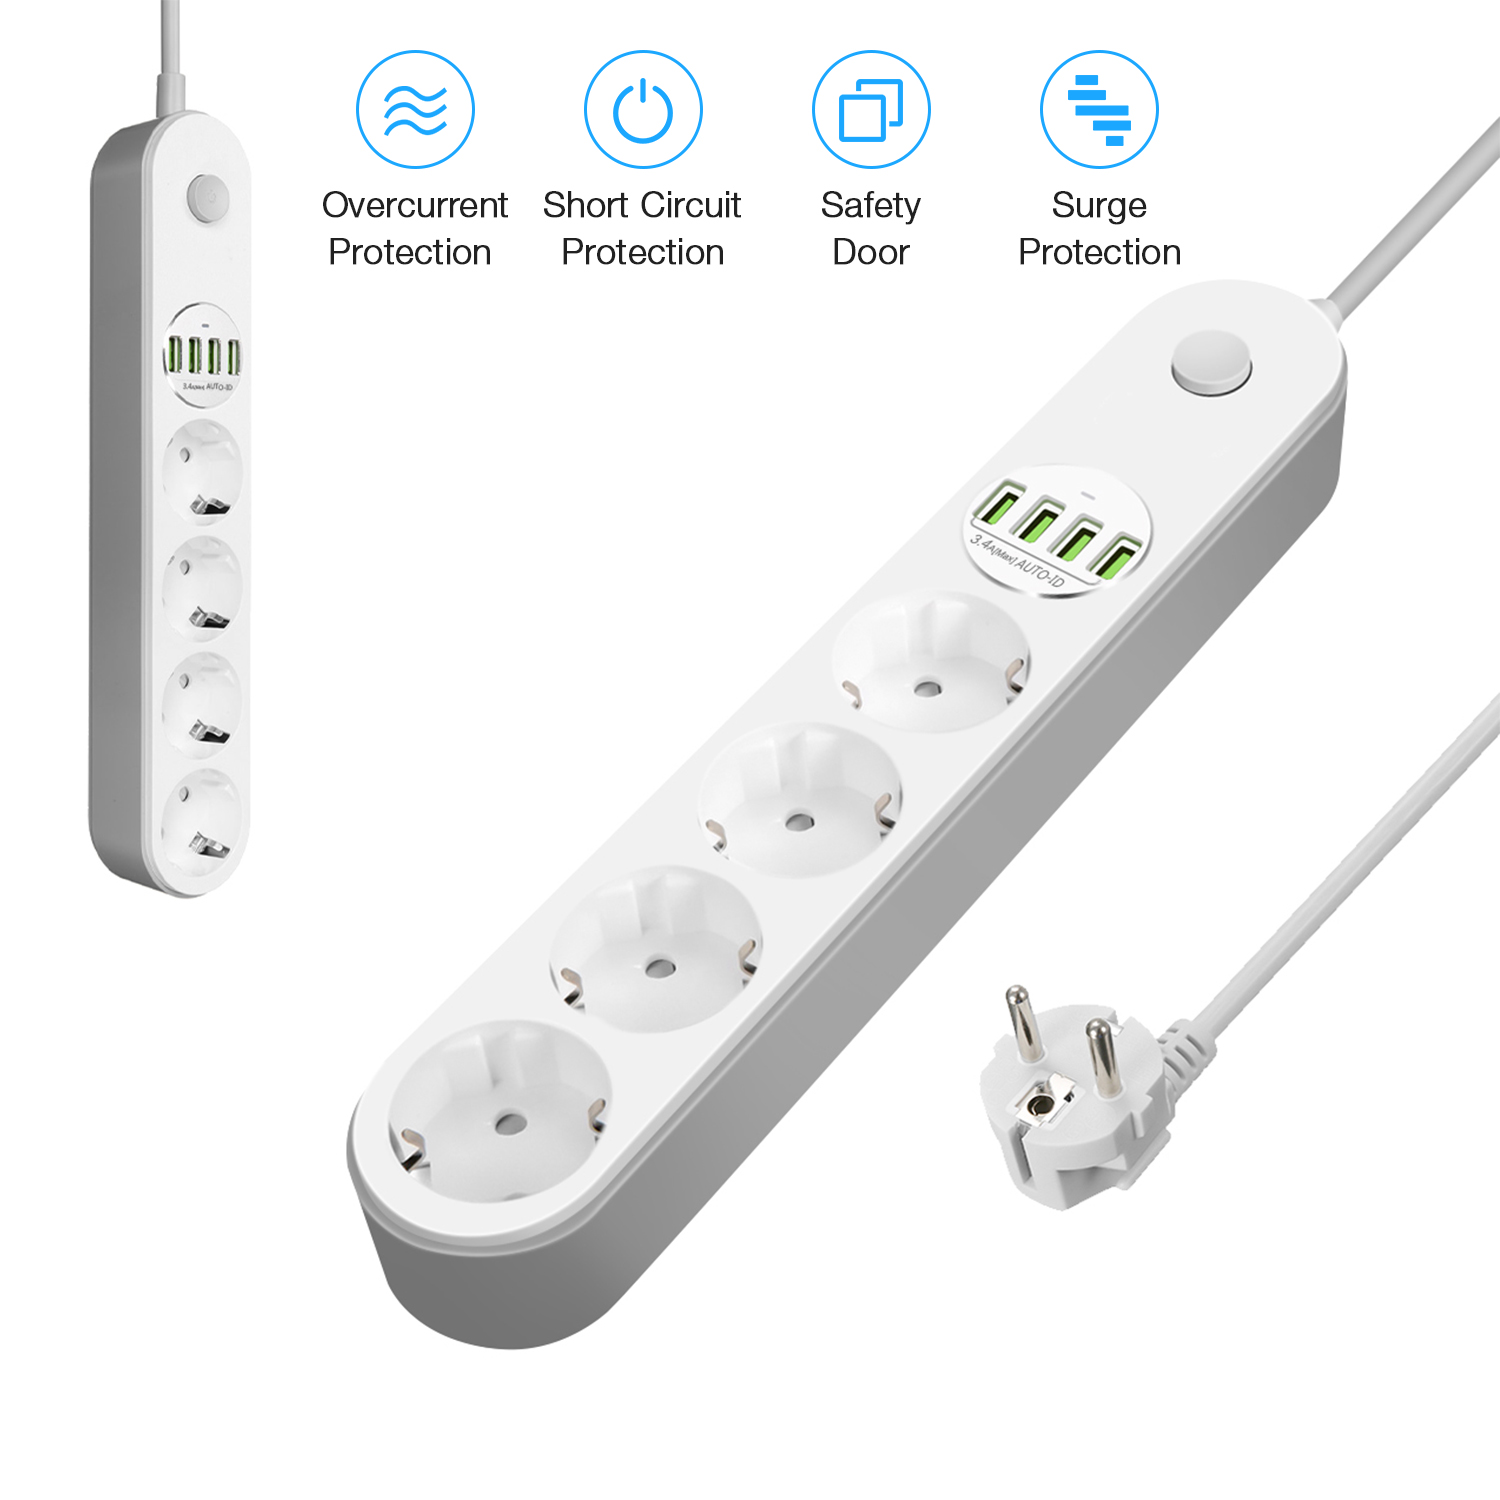 LDNIO-SE4432-Extension-Cord-Socket-Charger-With-4-USB-Ports--4-AC-Sockets-EU-Plug-Fast-Charging-For--1135687-5